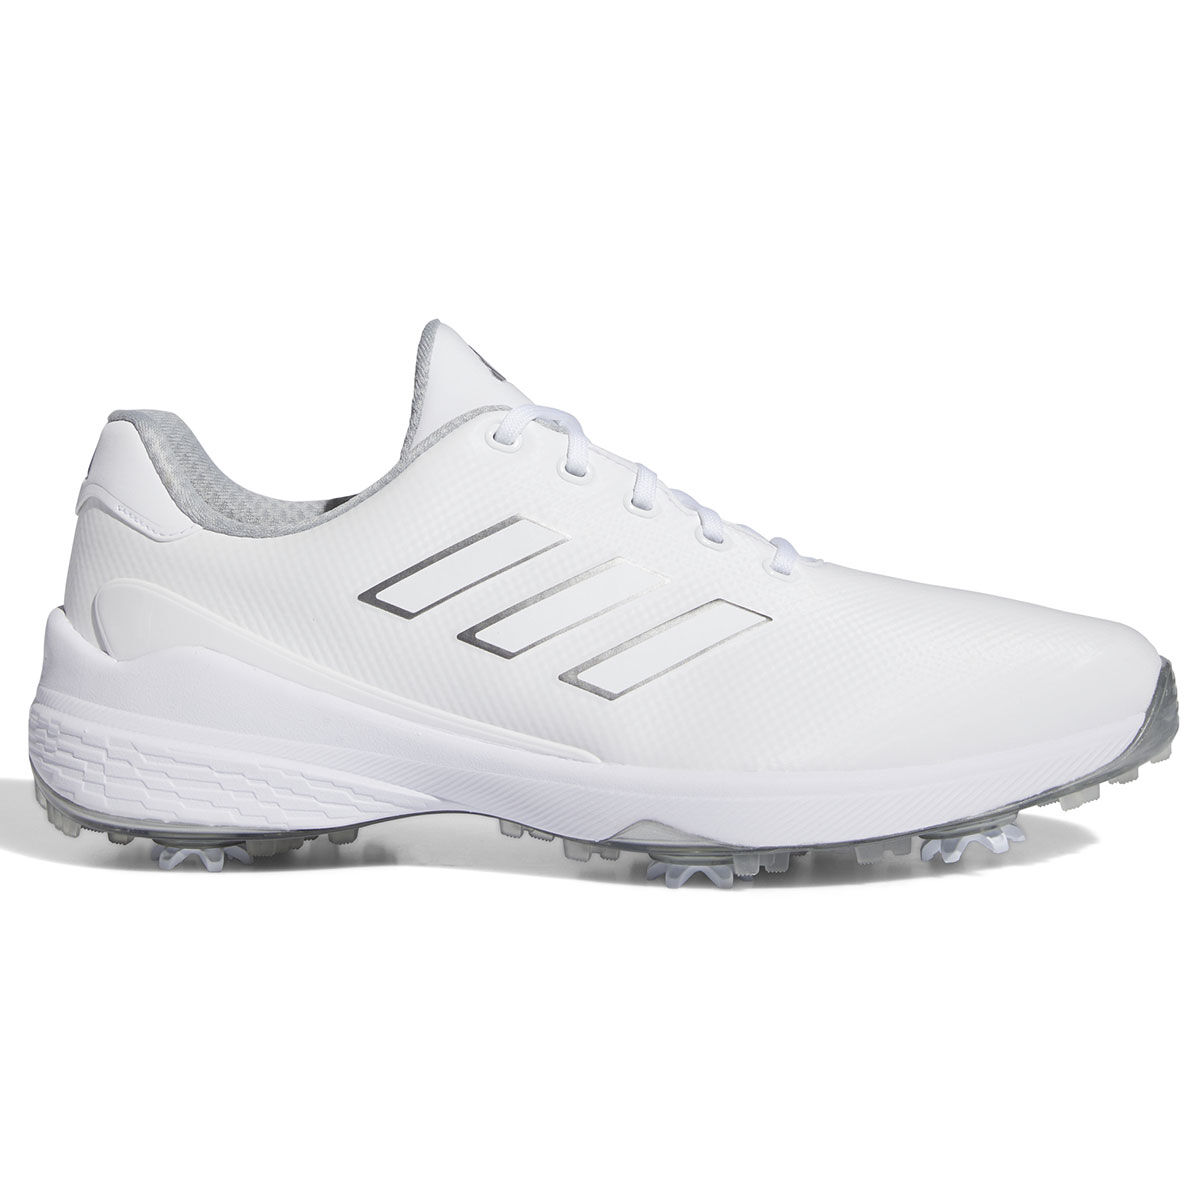 adidas Golf Mens White, Silver and Grey Lightweight ZG23 Waterproof Spiked Golf Shoes, Size: 7 | American Golf